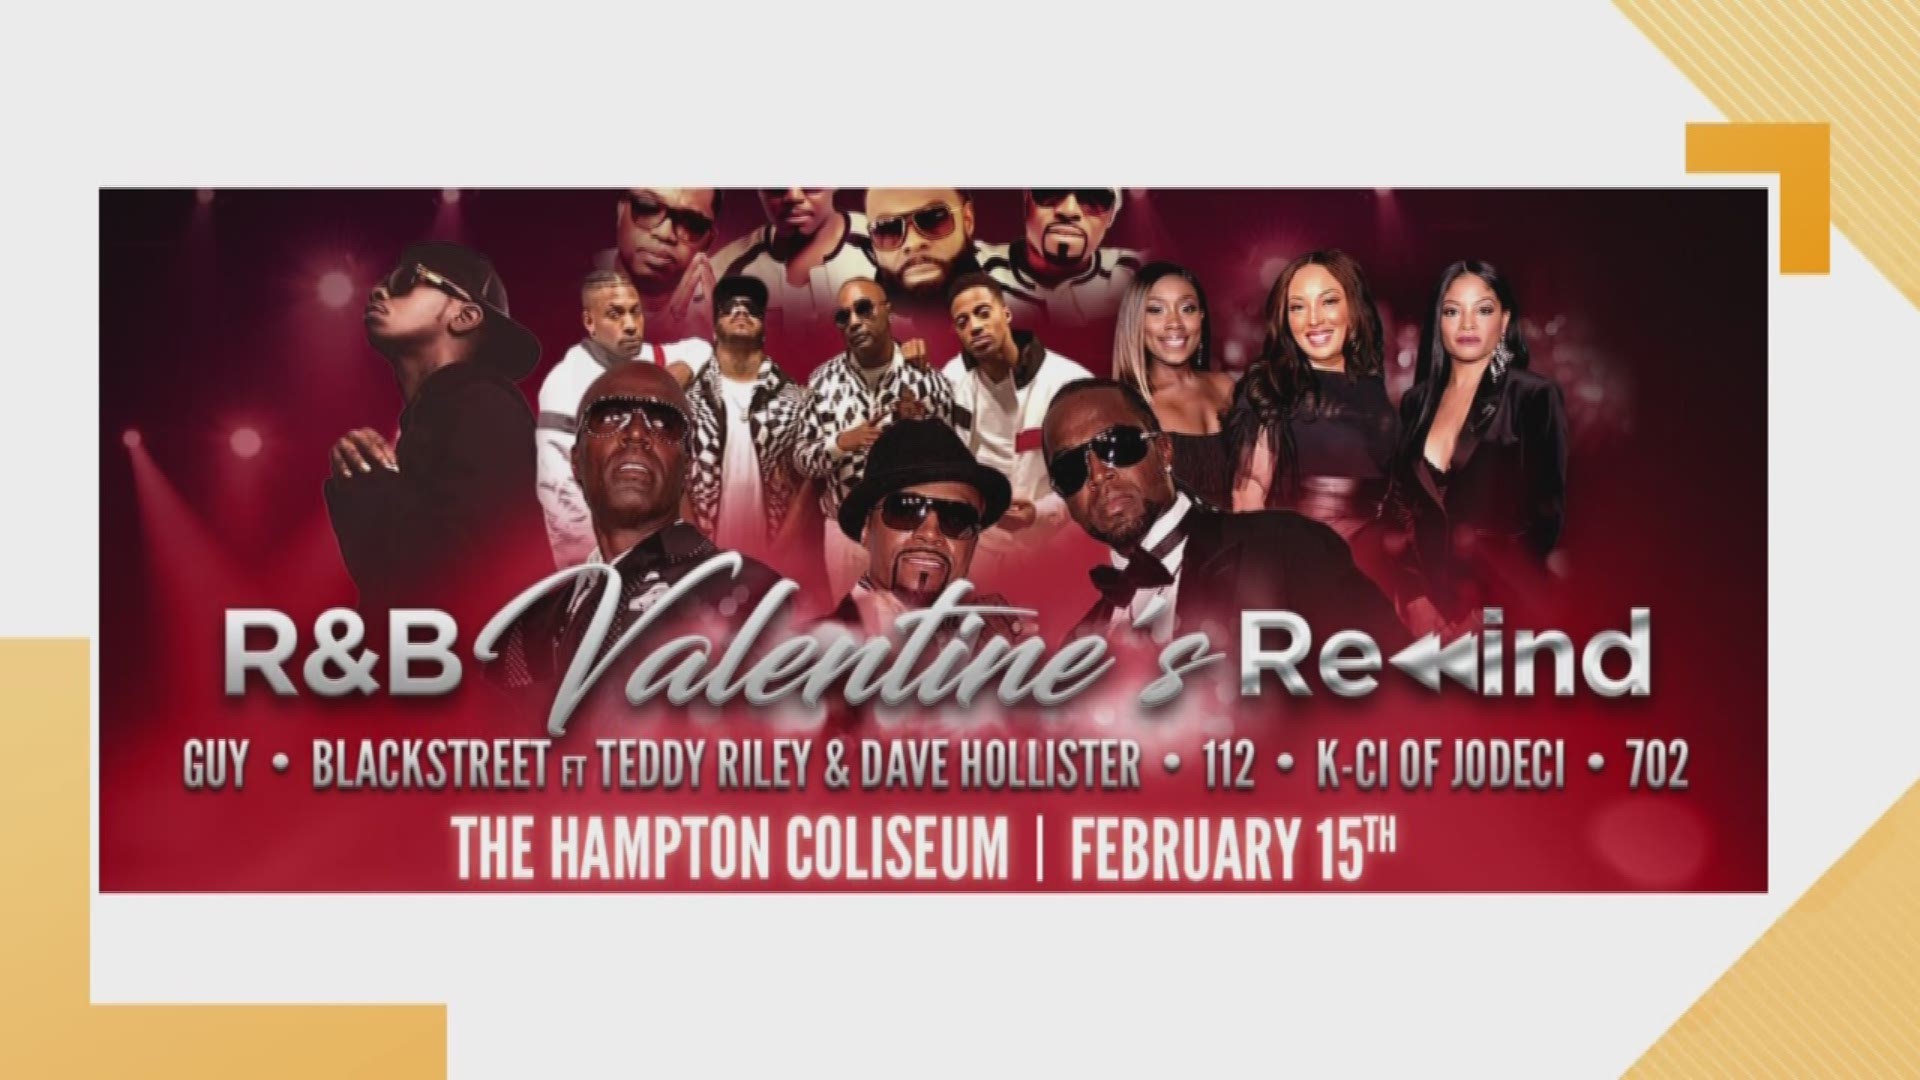 Check out a very cool way to celebrate Valentine's Day, R&B Valentine's Rewind.